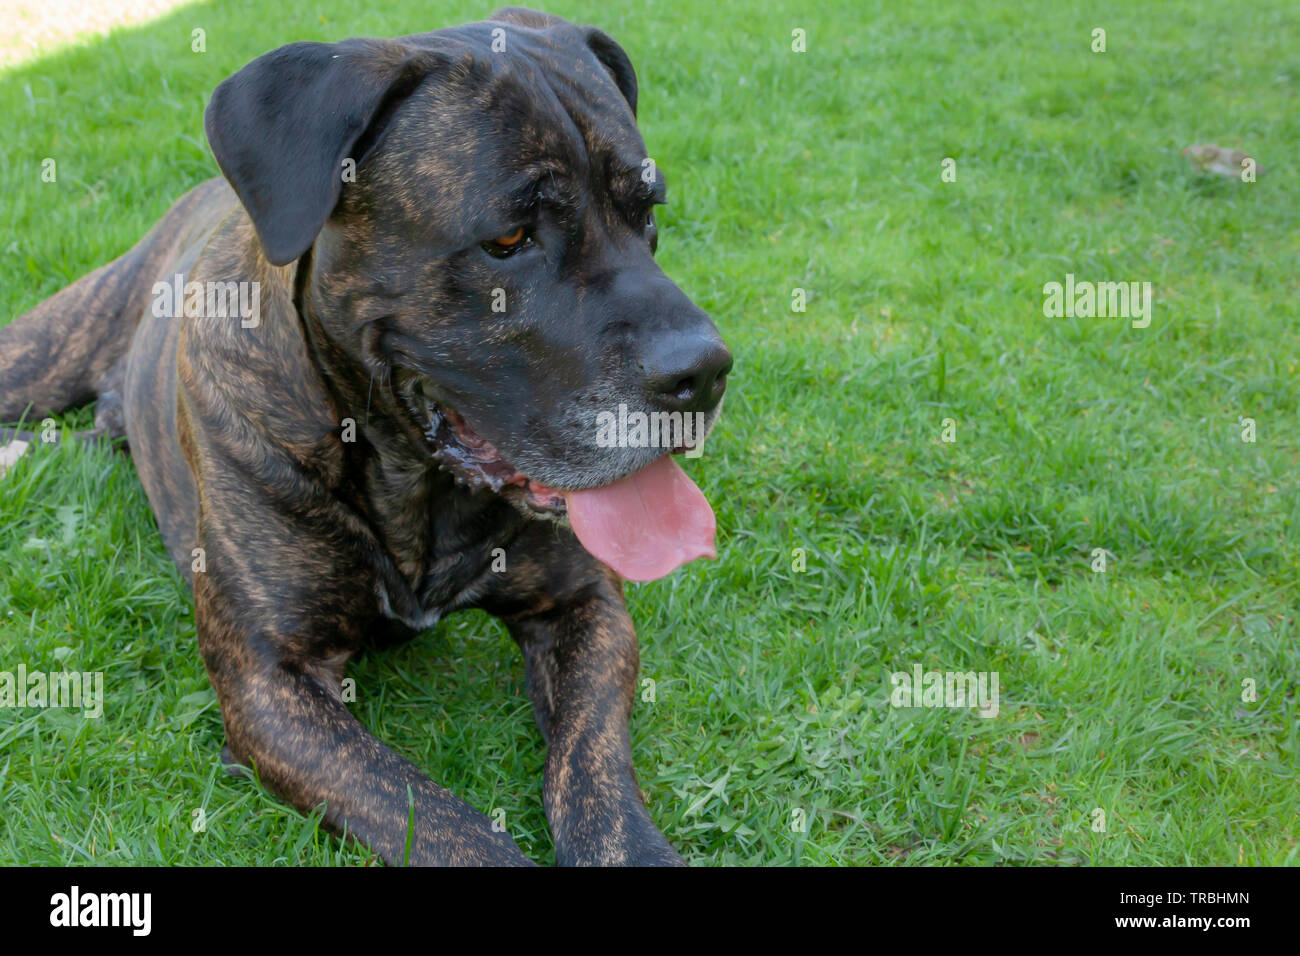 An amazing portrait of brown cane Corso dog in the park on a sunny day Stock Photo